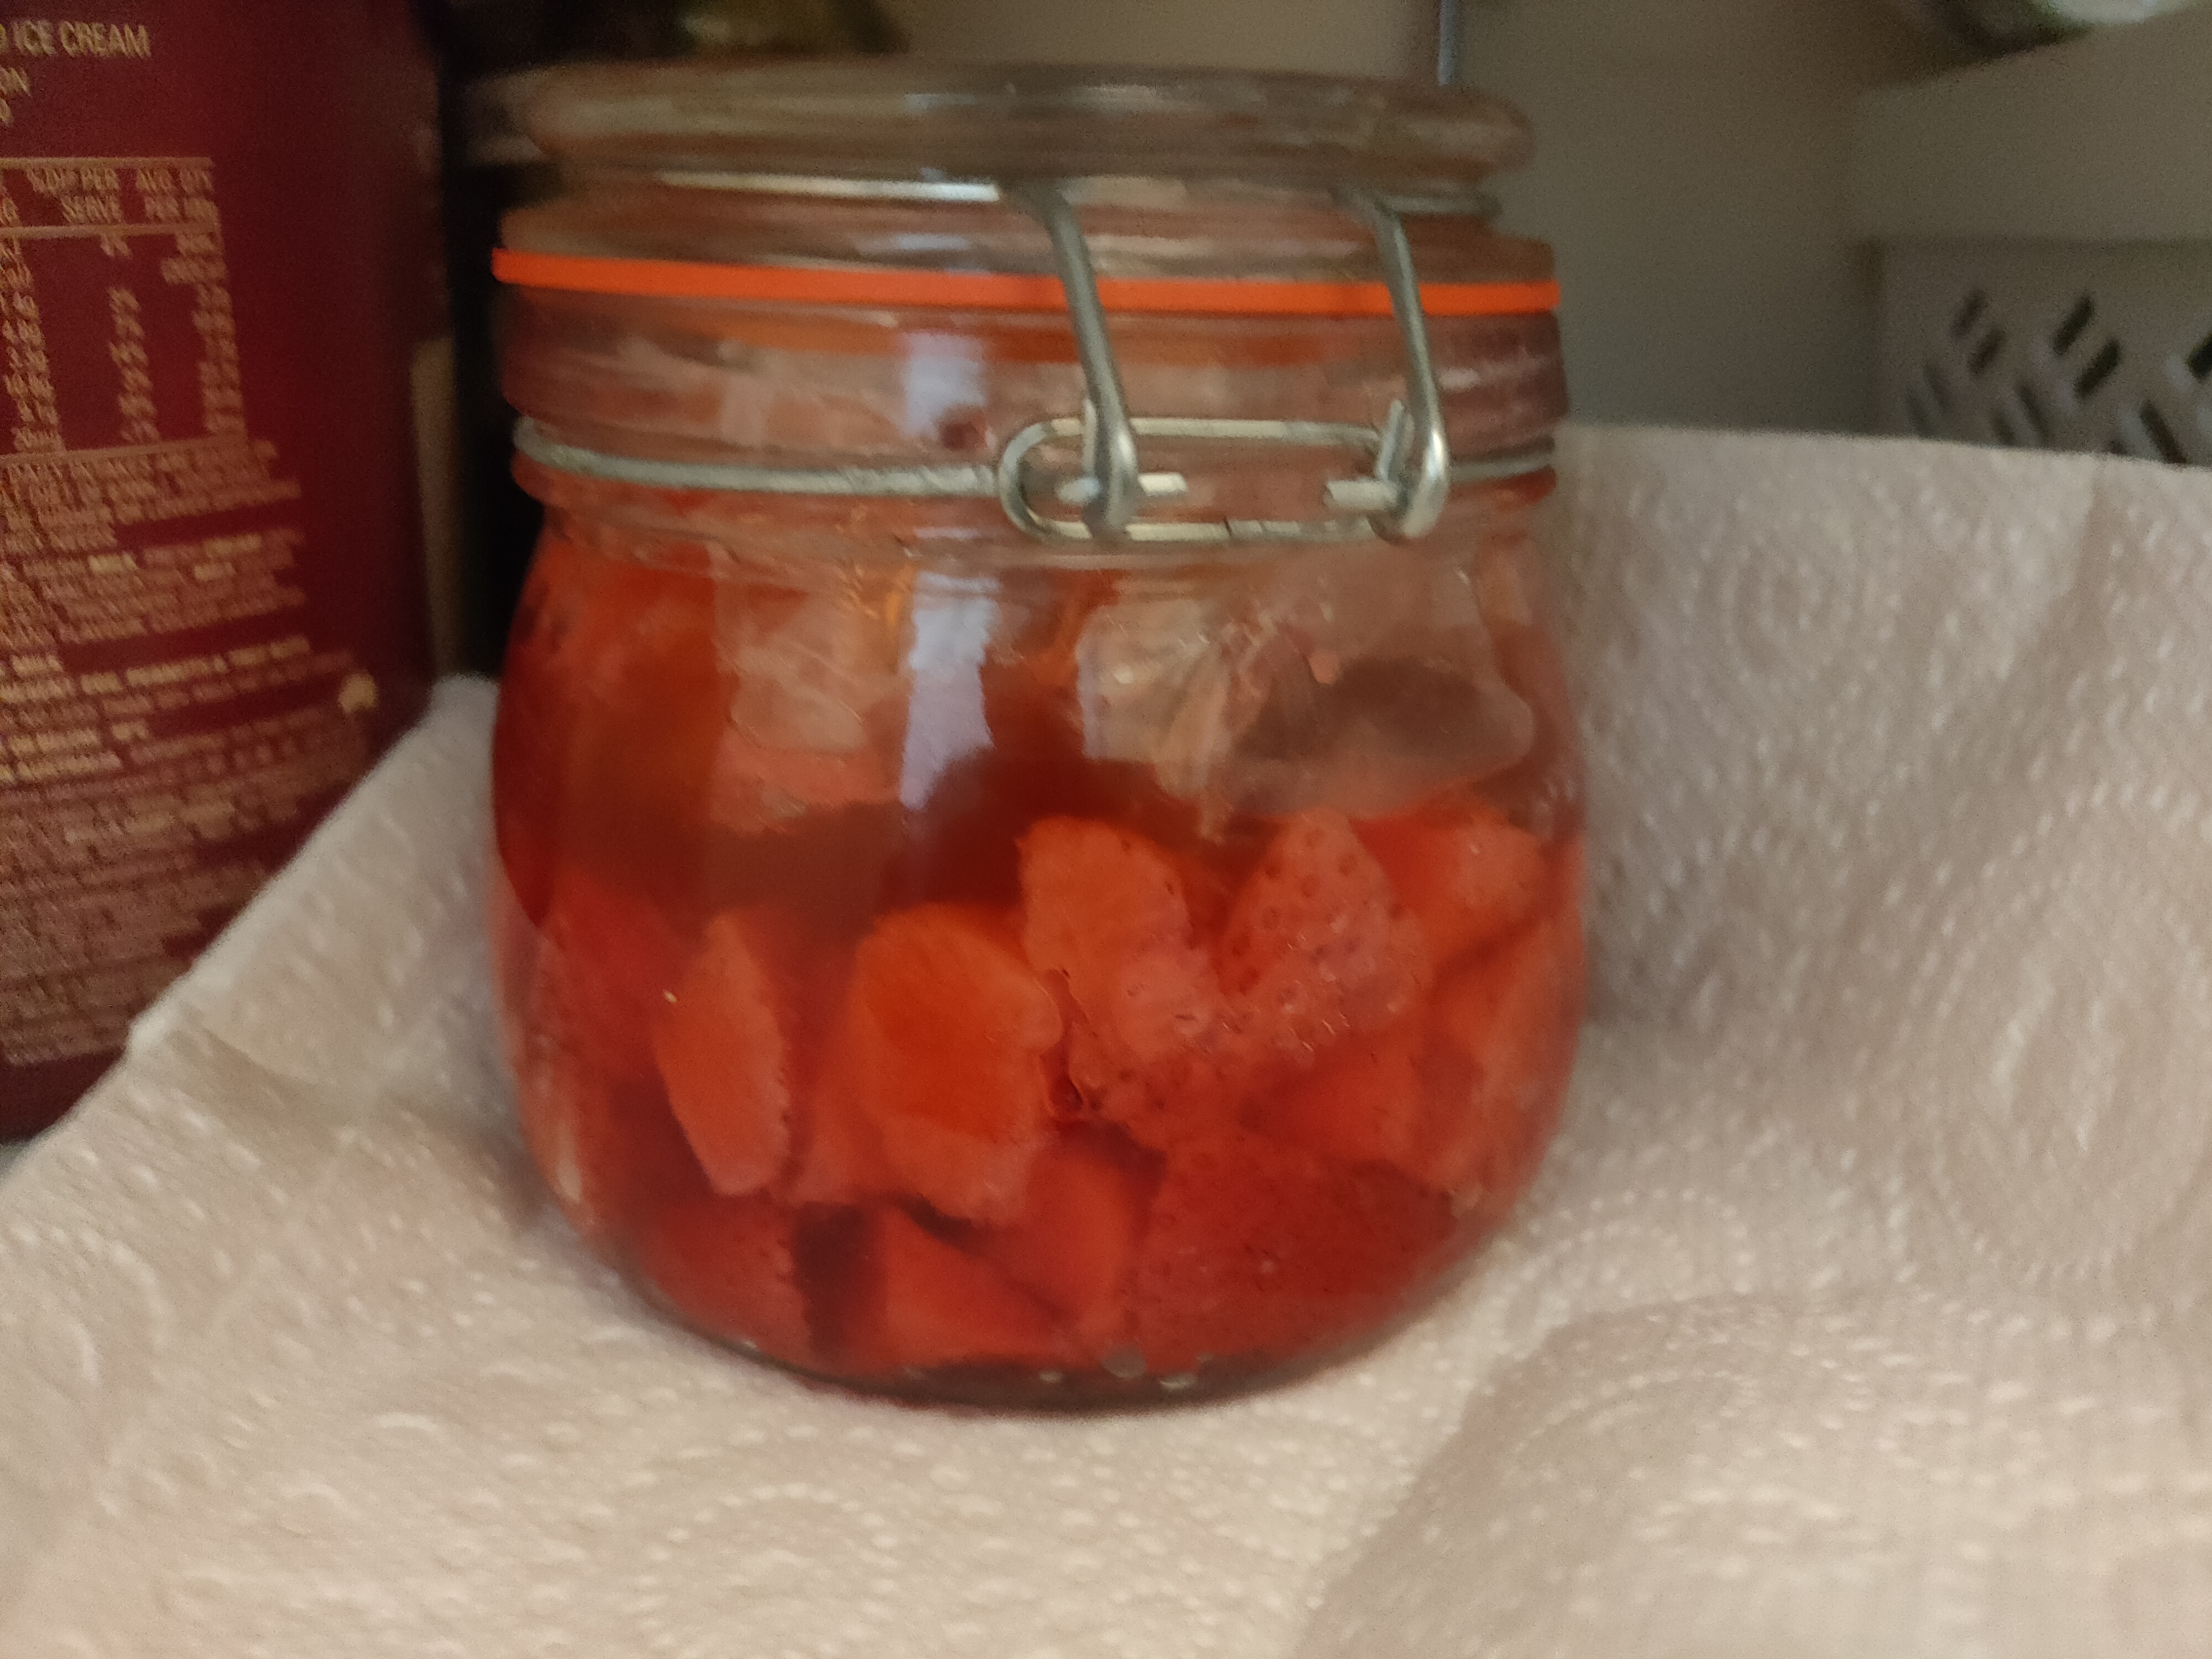 Chopped strawberries in a jar on day 3